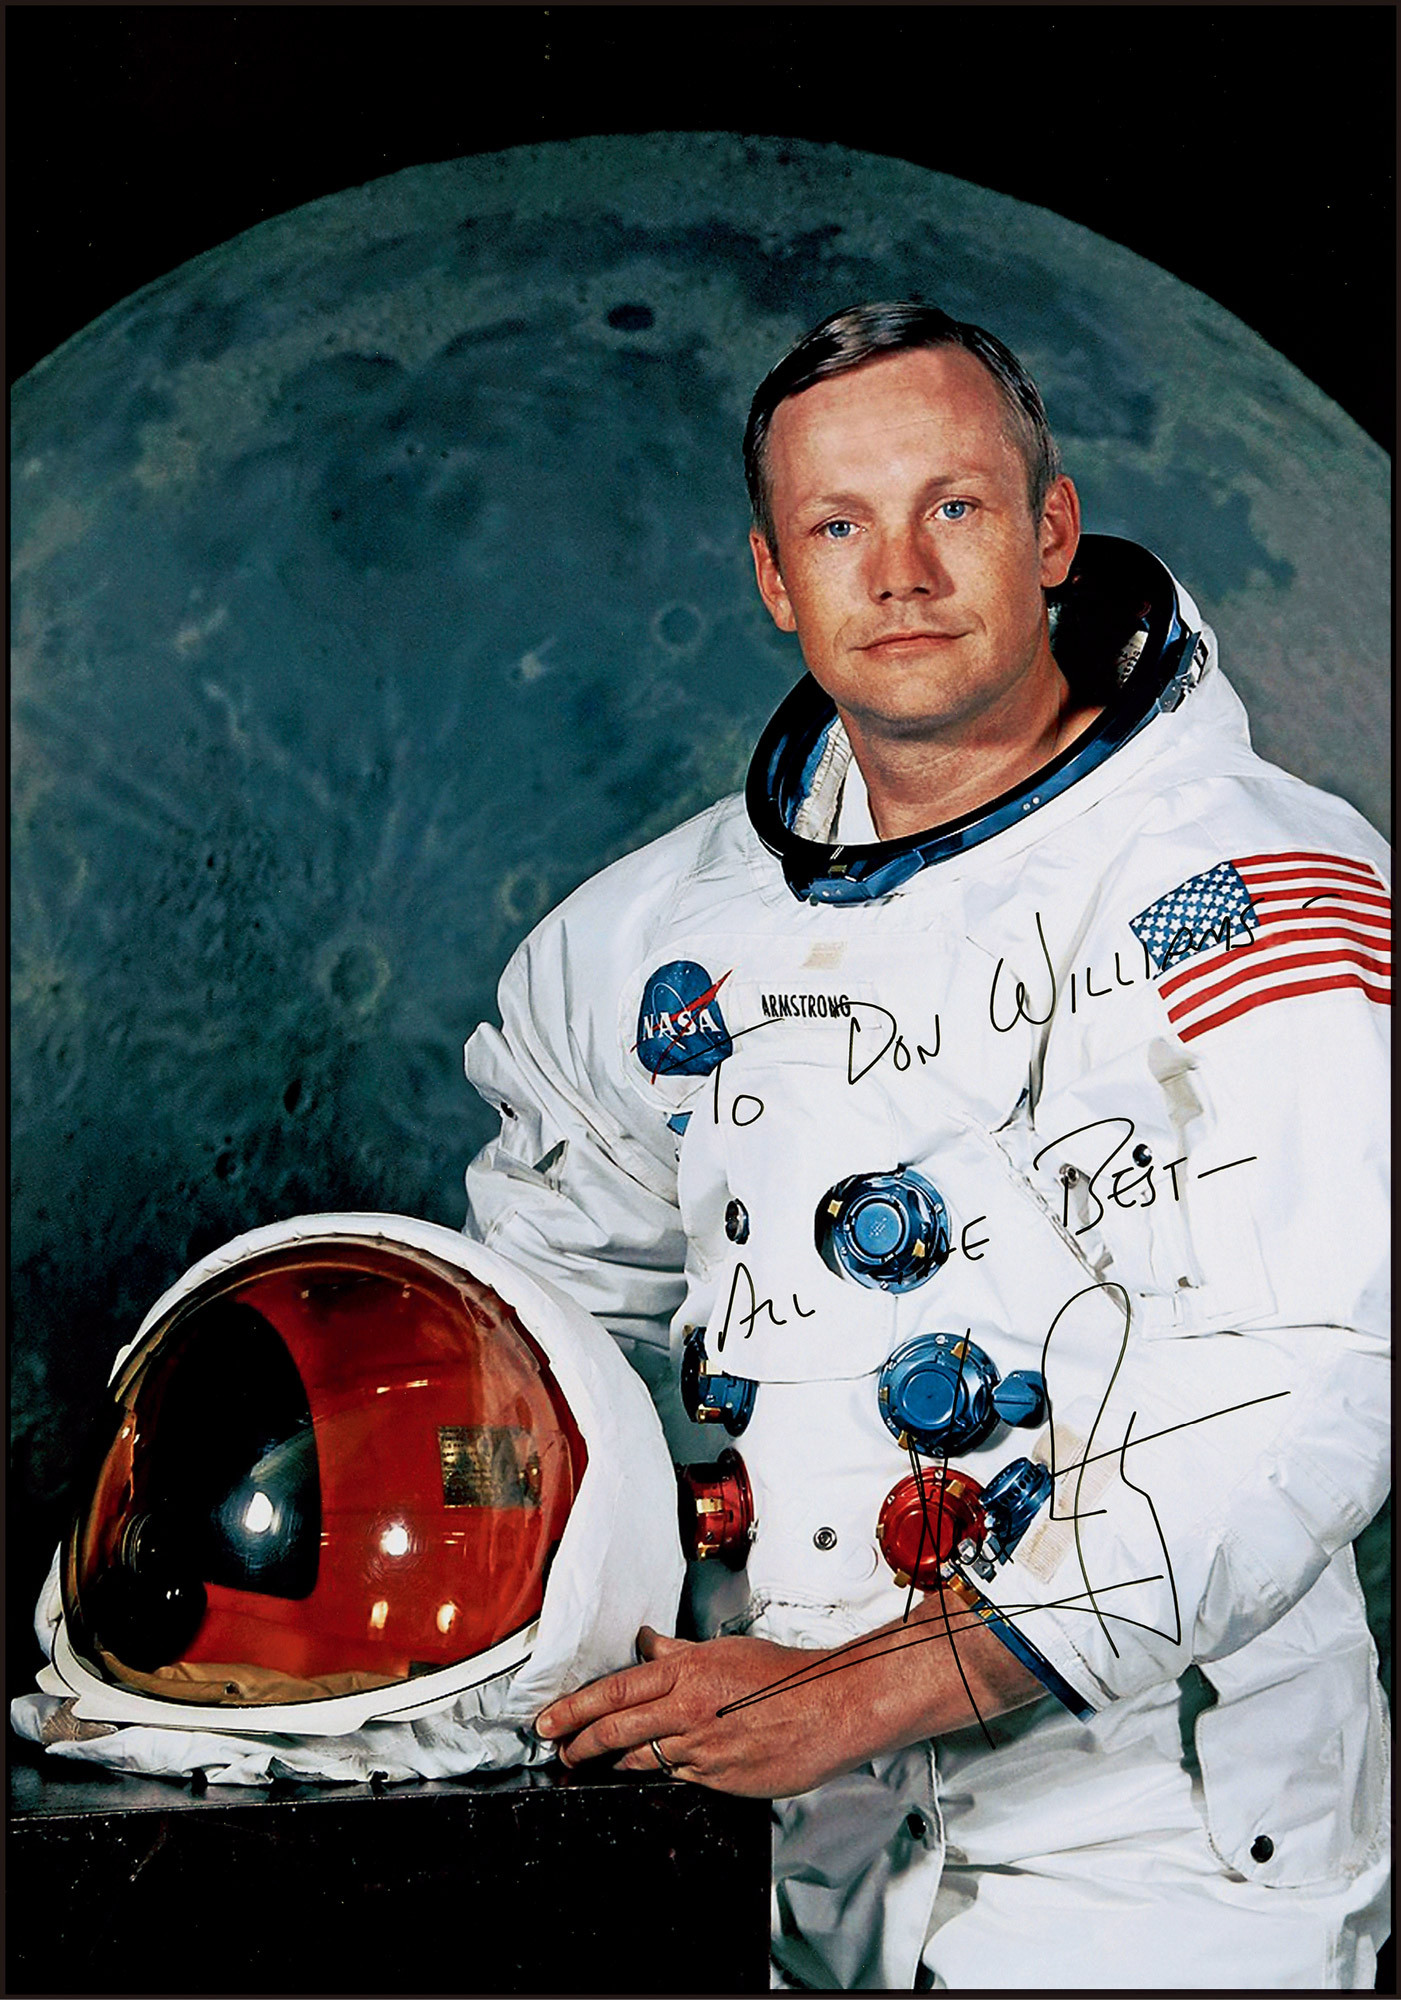 The autographed photo of Neil Armstrong, the first man to land on the moon, with a certificate